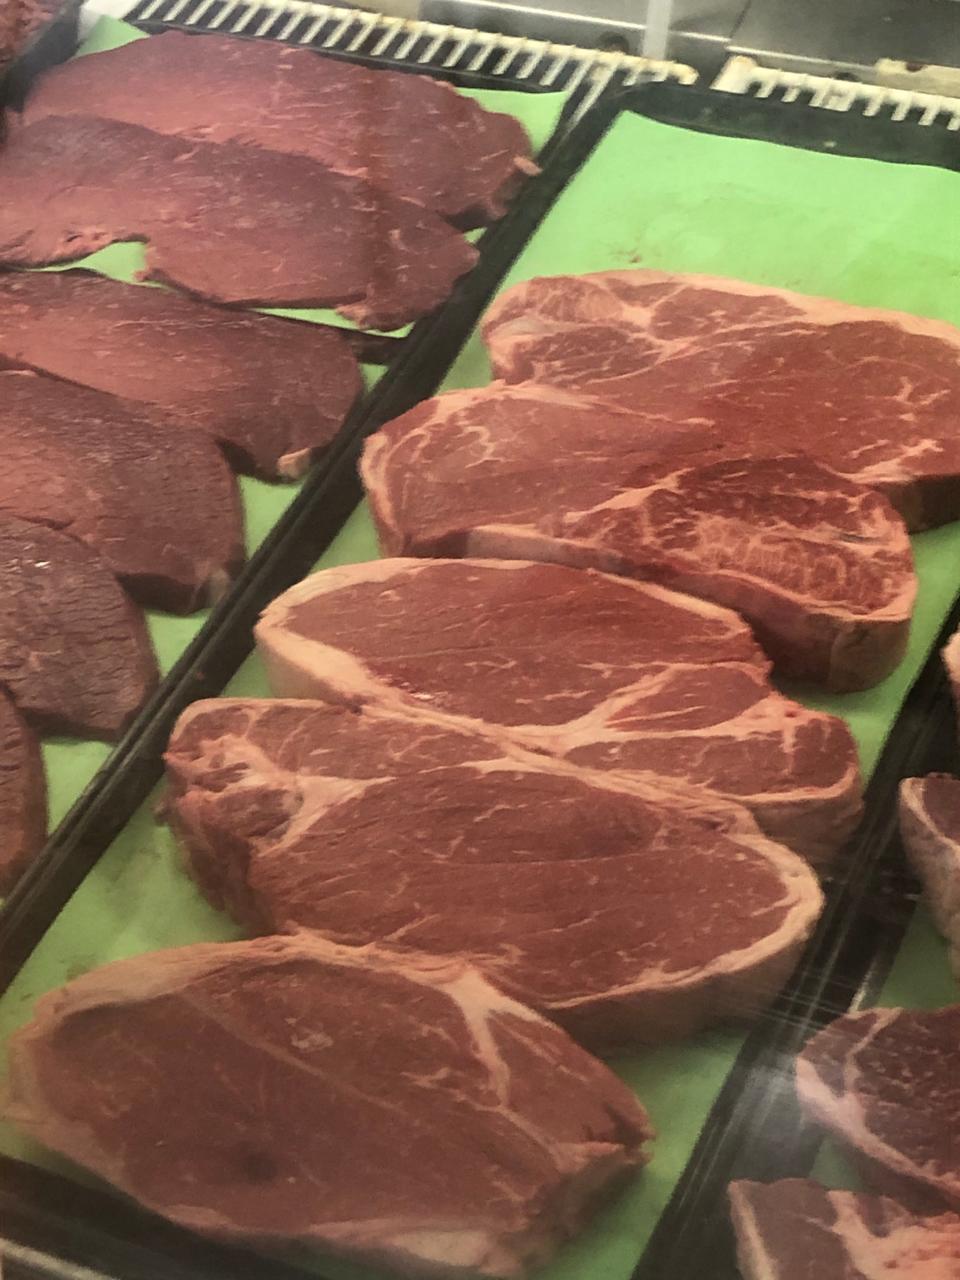 Rose's Hillcrest Market in Alliance has been in business for 23 years, supplying customers and restaurants with meat. Pictured here is steak in one of the displays. The store is closing Tuesday.